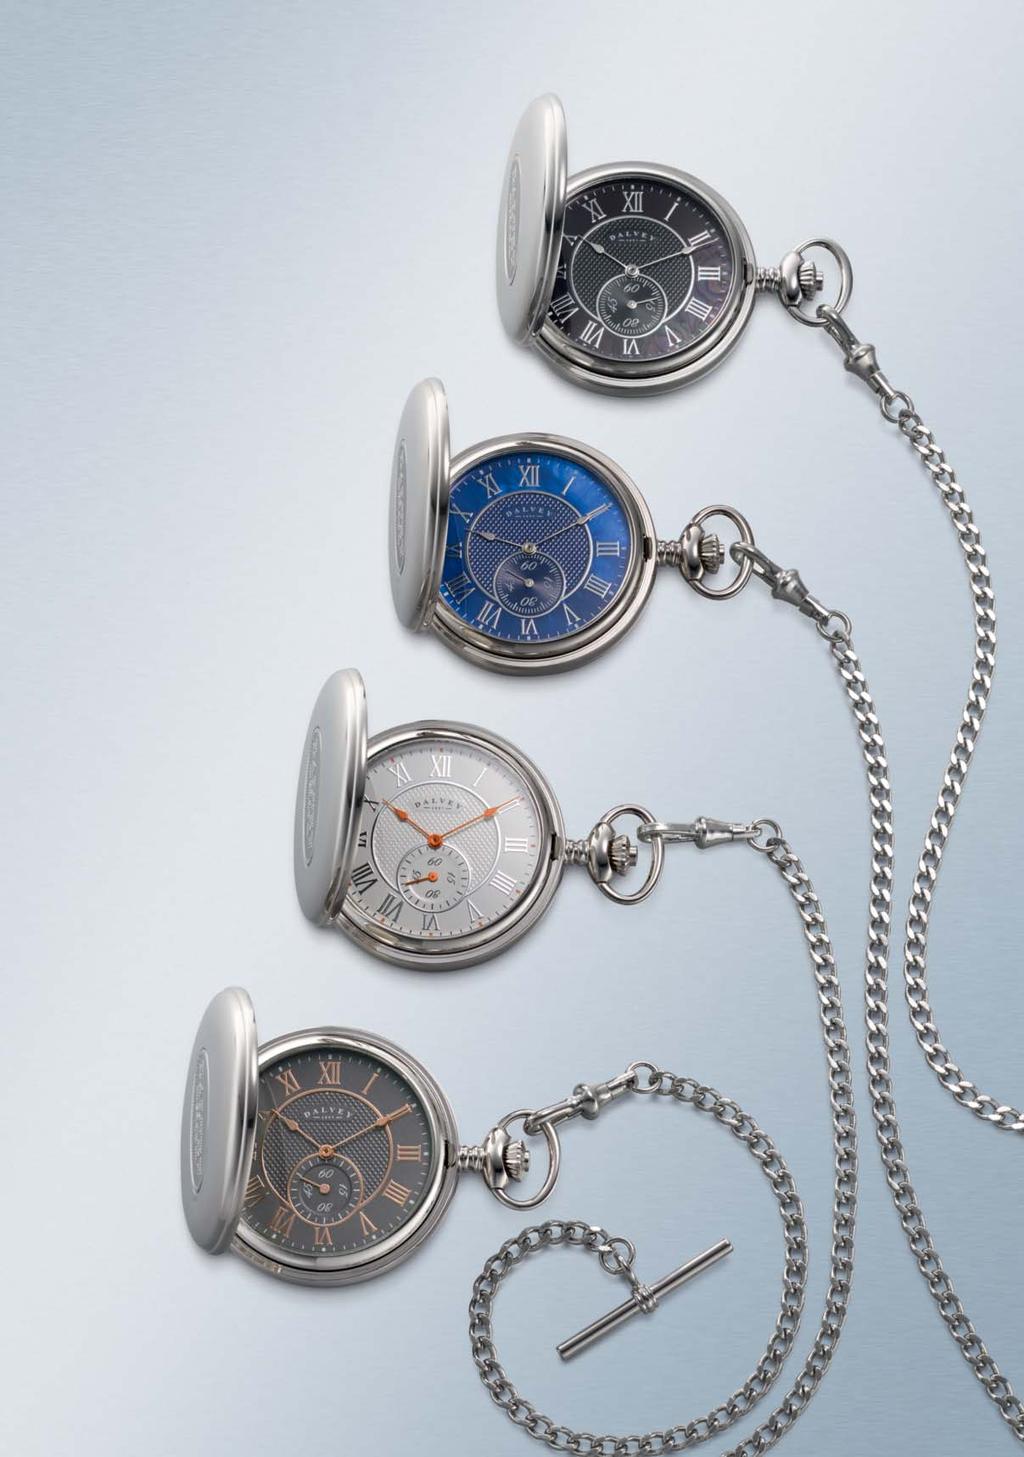 FULL HUNTER POCKET WATCHES Striking designs incorporating richly textured, meticulously detailed faces, full hunter fob-watch cases and precision quartz movements: ideal accessories for the